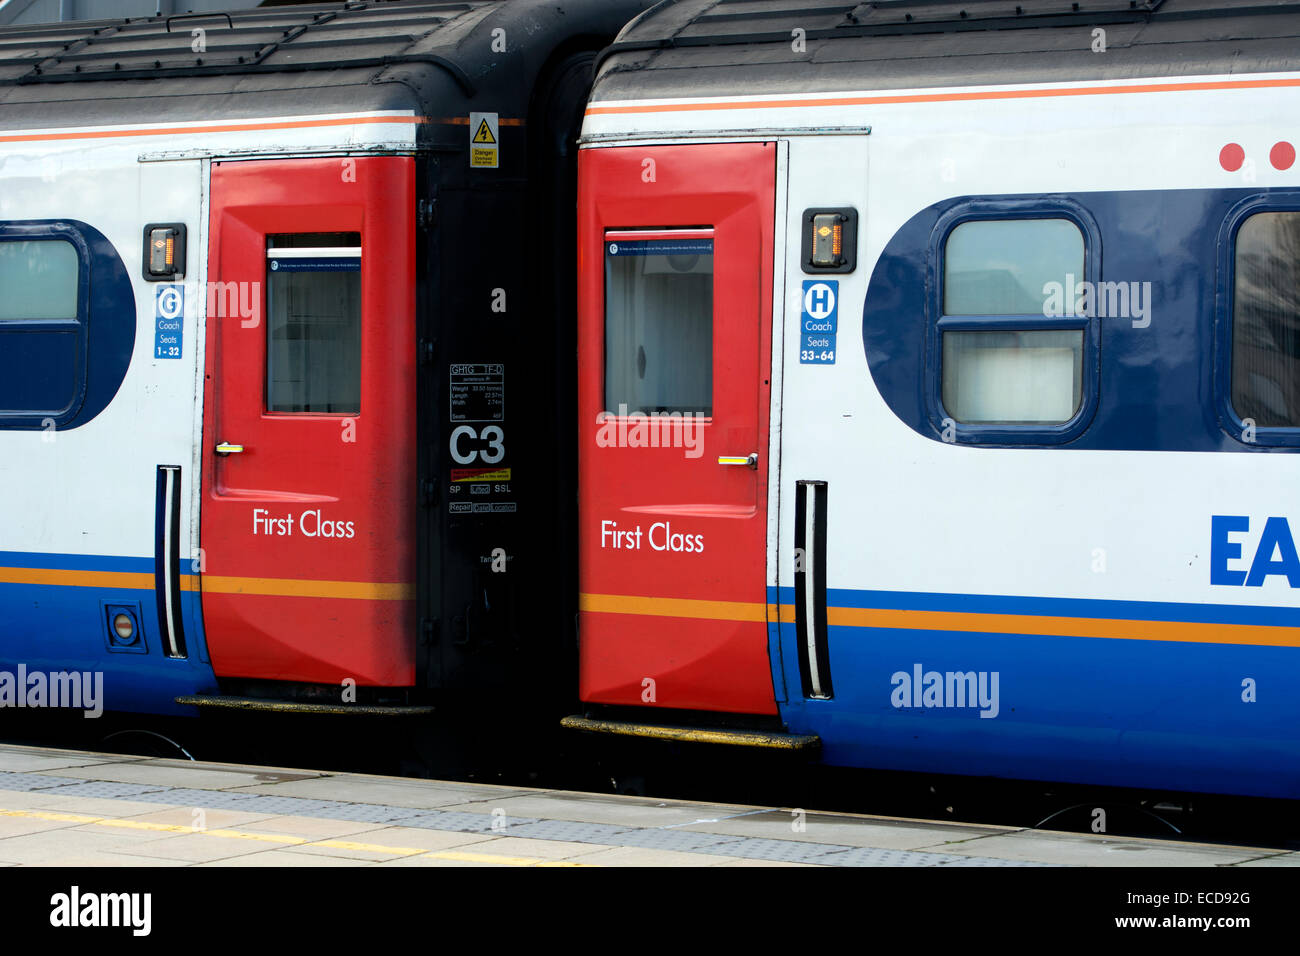 First Class carriages on East Midlands Trains HST train, Leicester station, UK Stock Photo